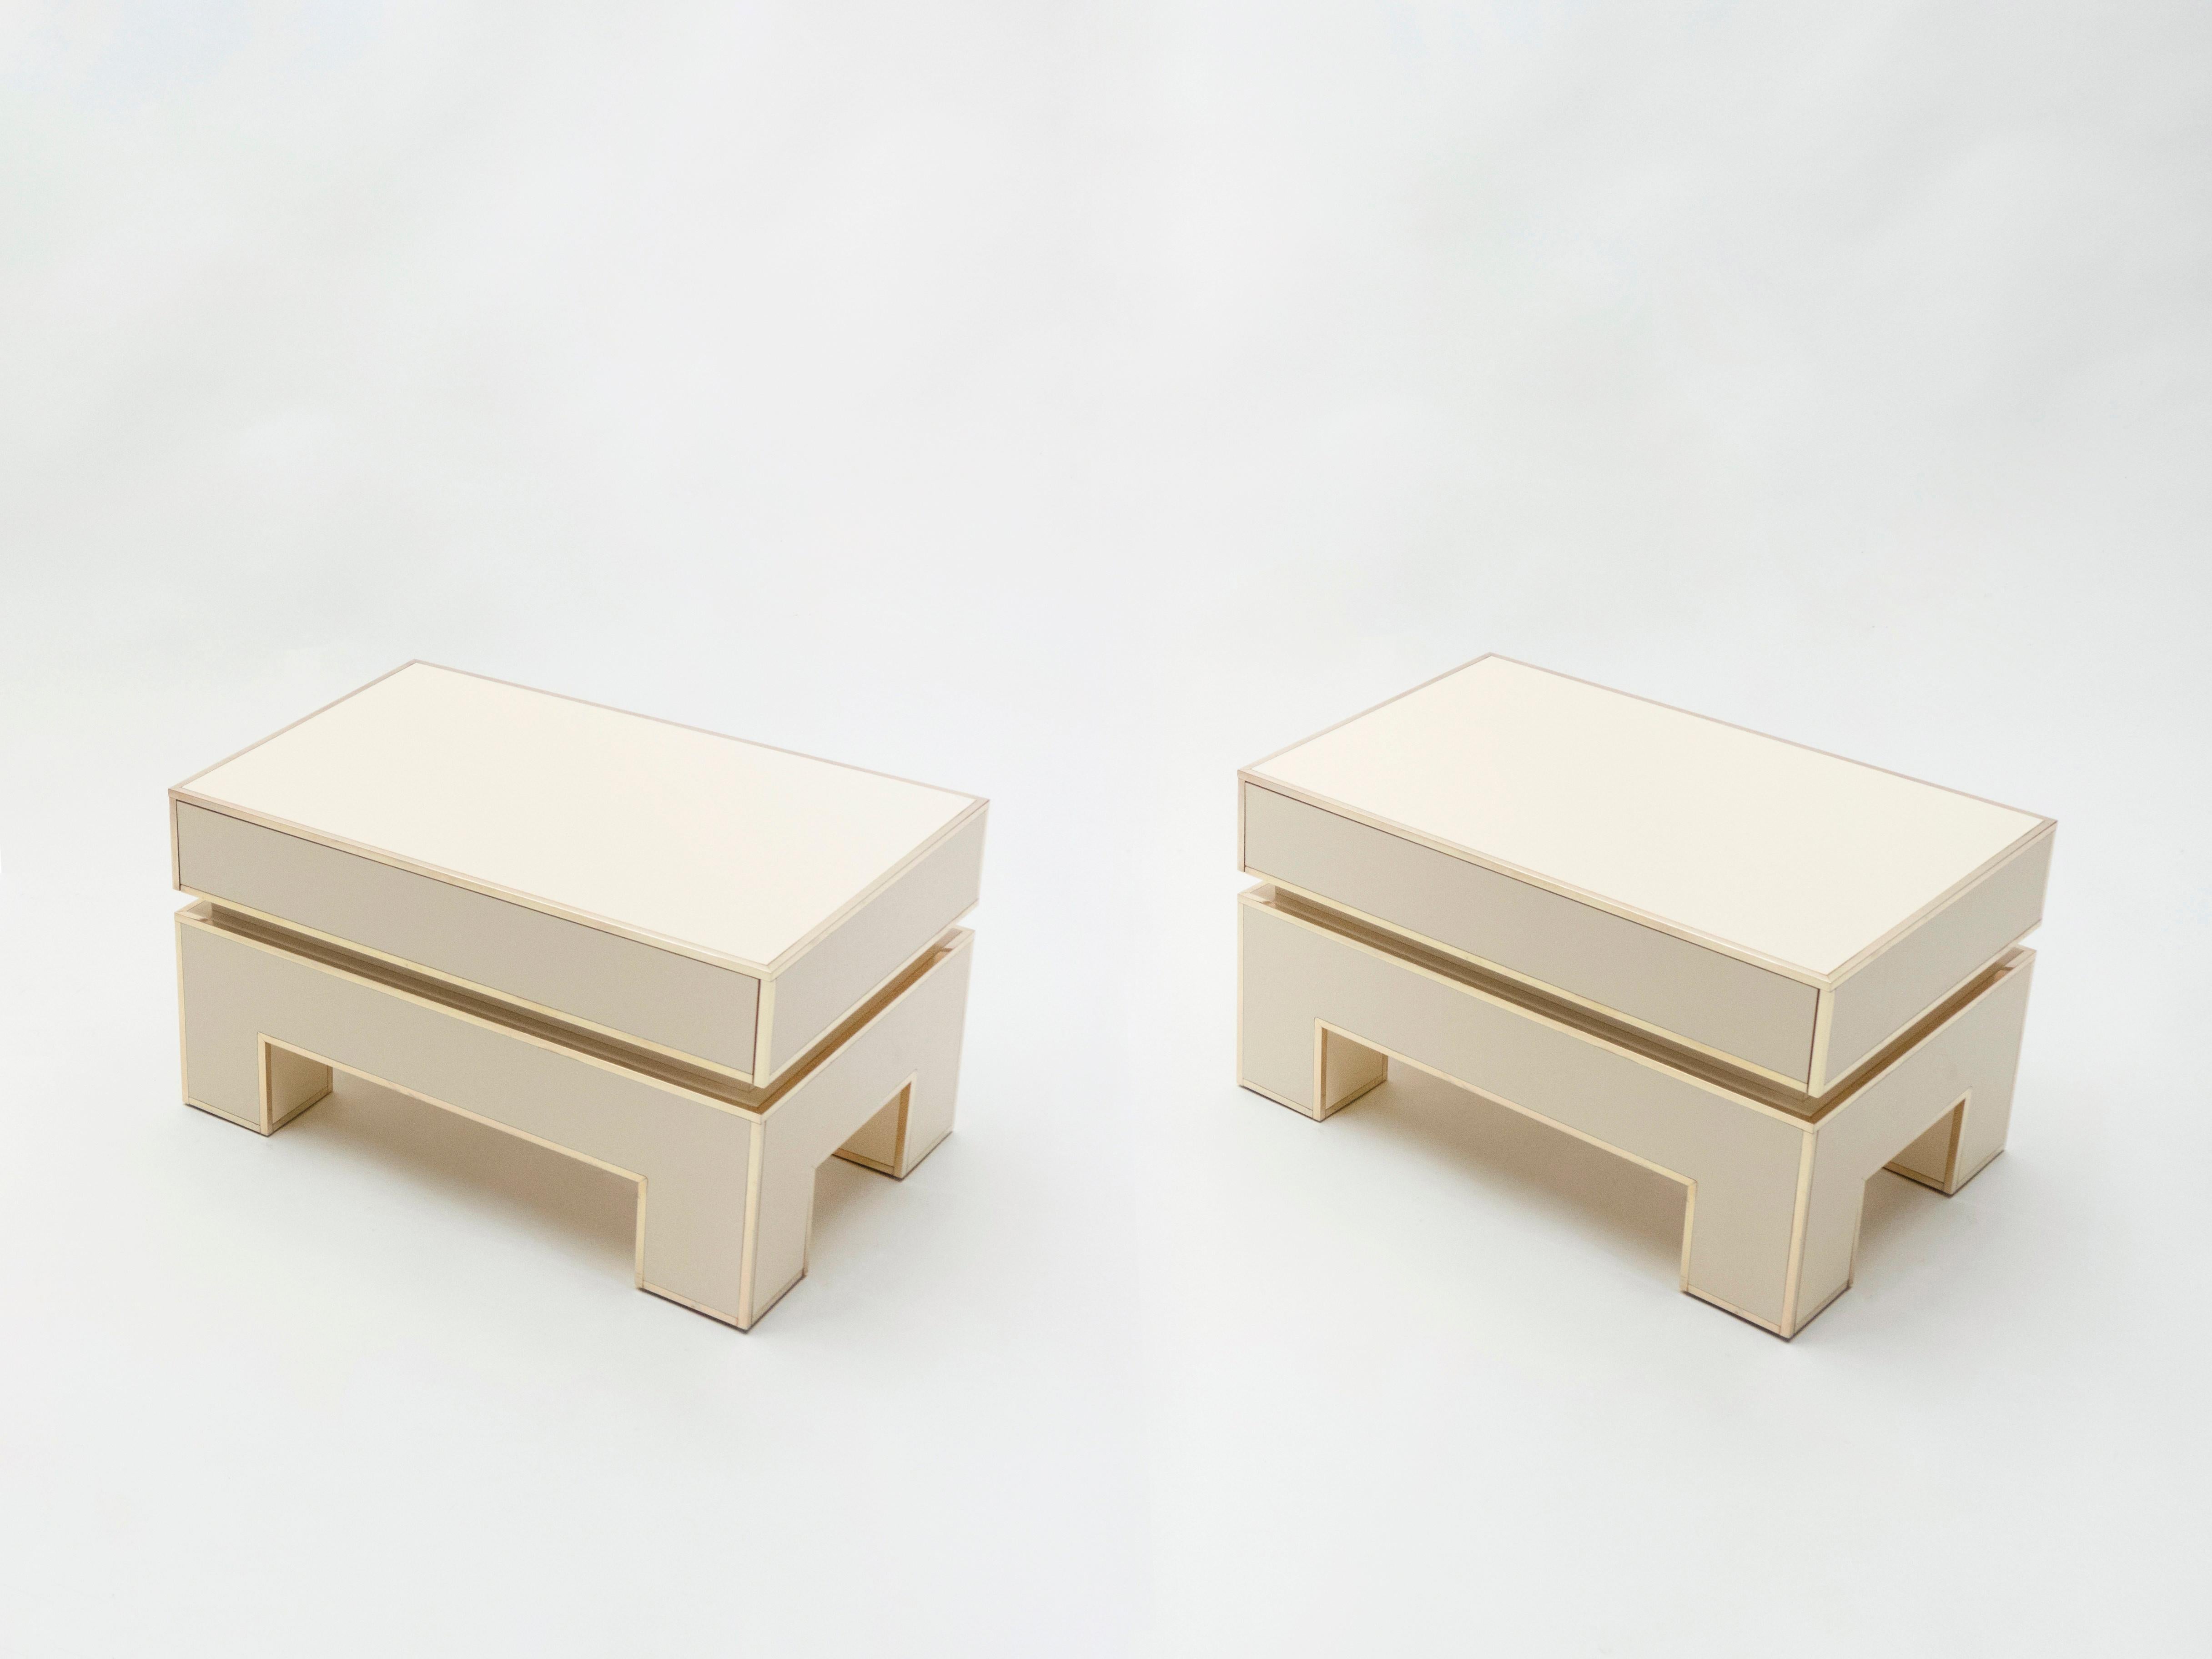 French Pair of White Lacquer Brass End Tables by Alain Delon for Maison Jansen, 1975